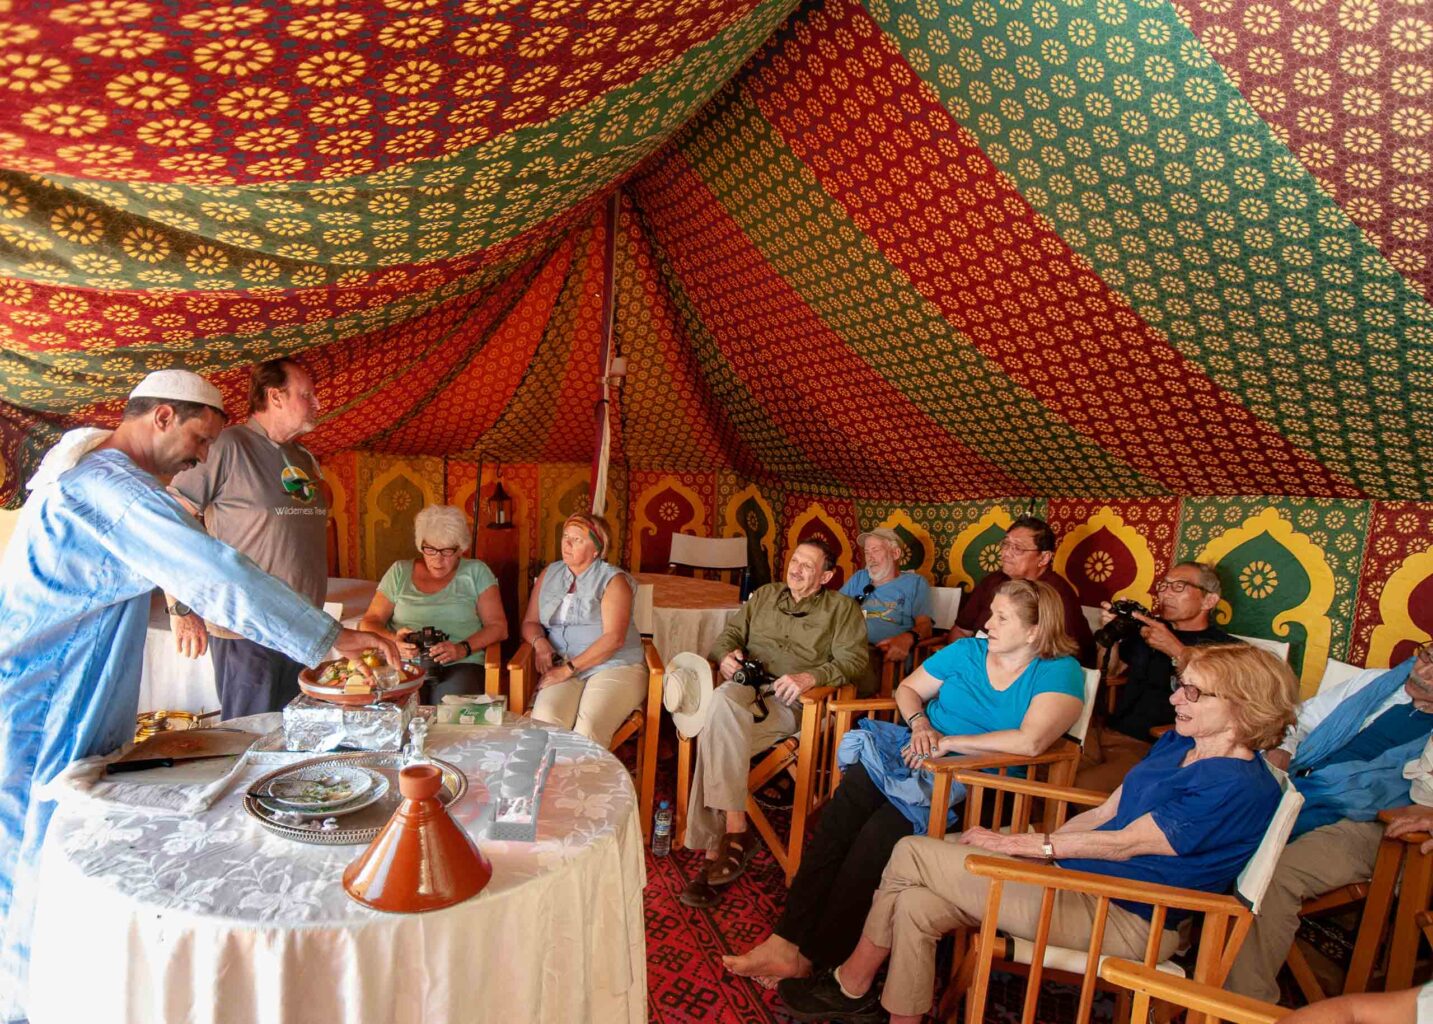 Eight travelers prepare to dine in an exotic Moroccan tent in the Sahara Desert.